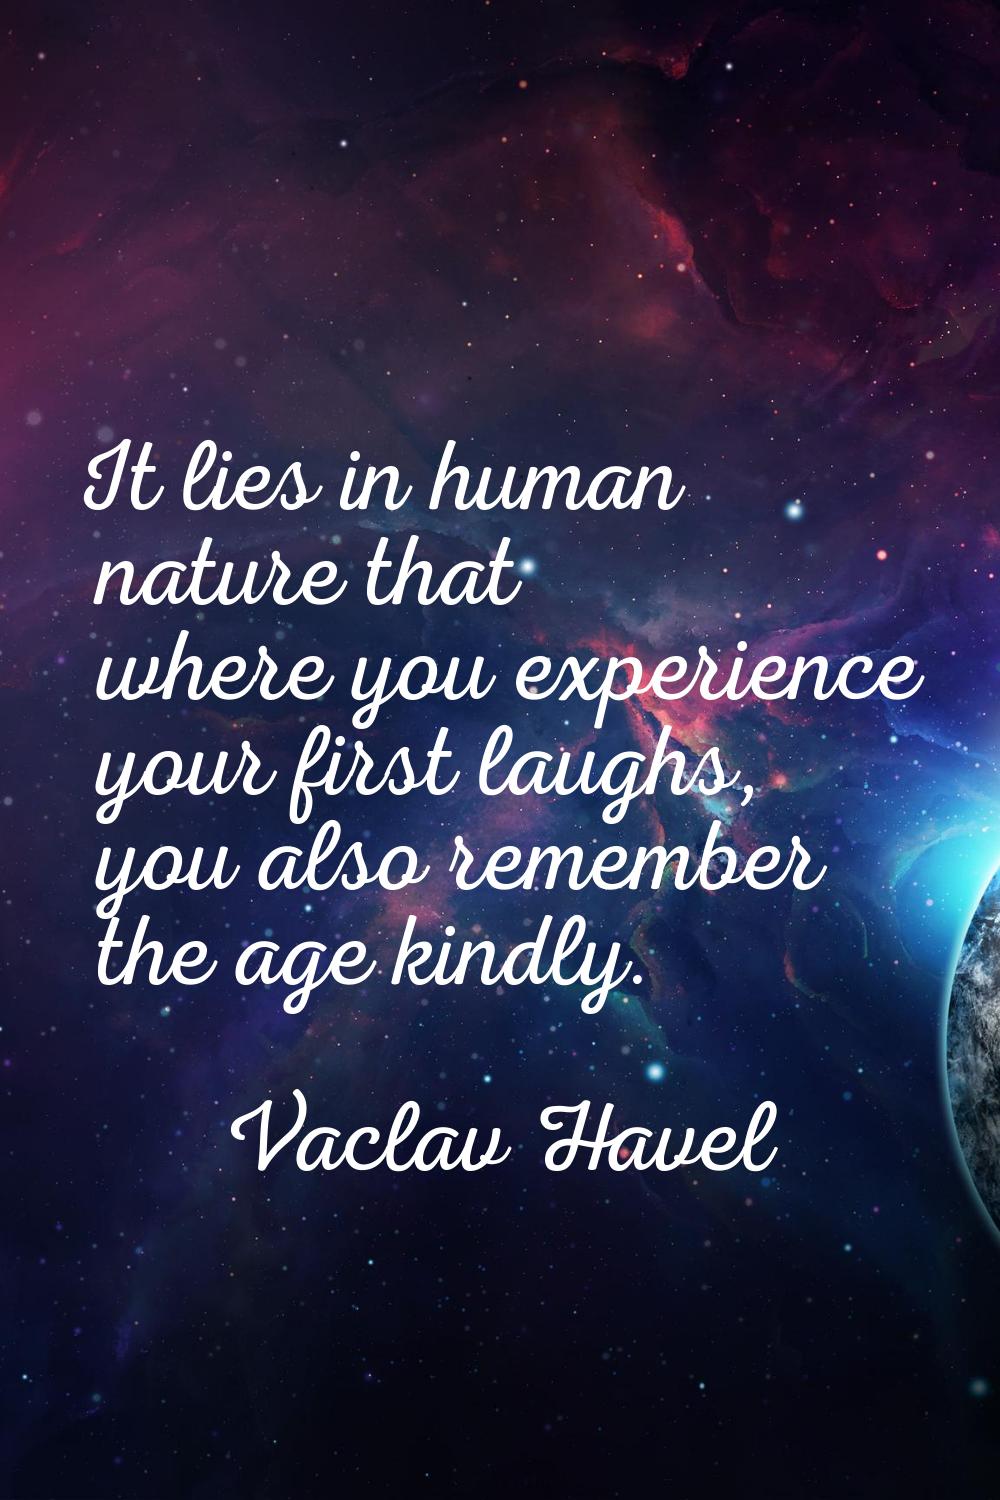 It lies in human nature that where you experience your first laughs, you also remember the age kind